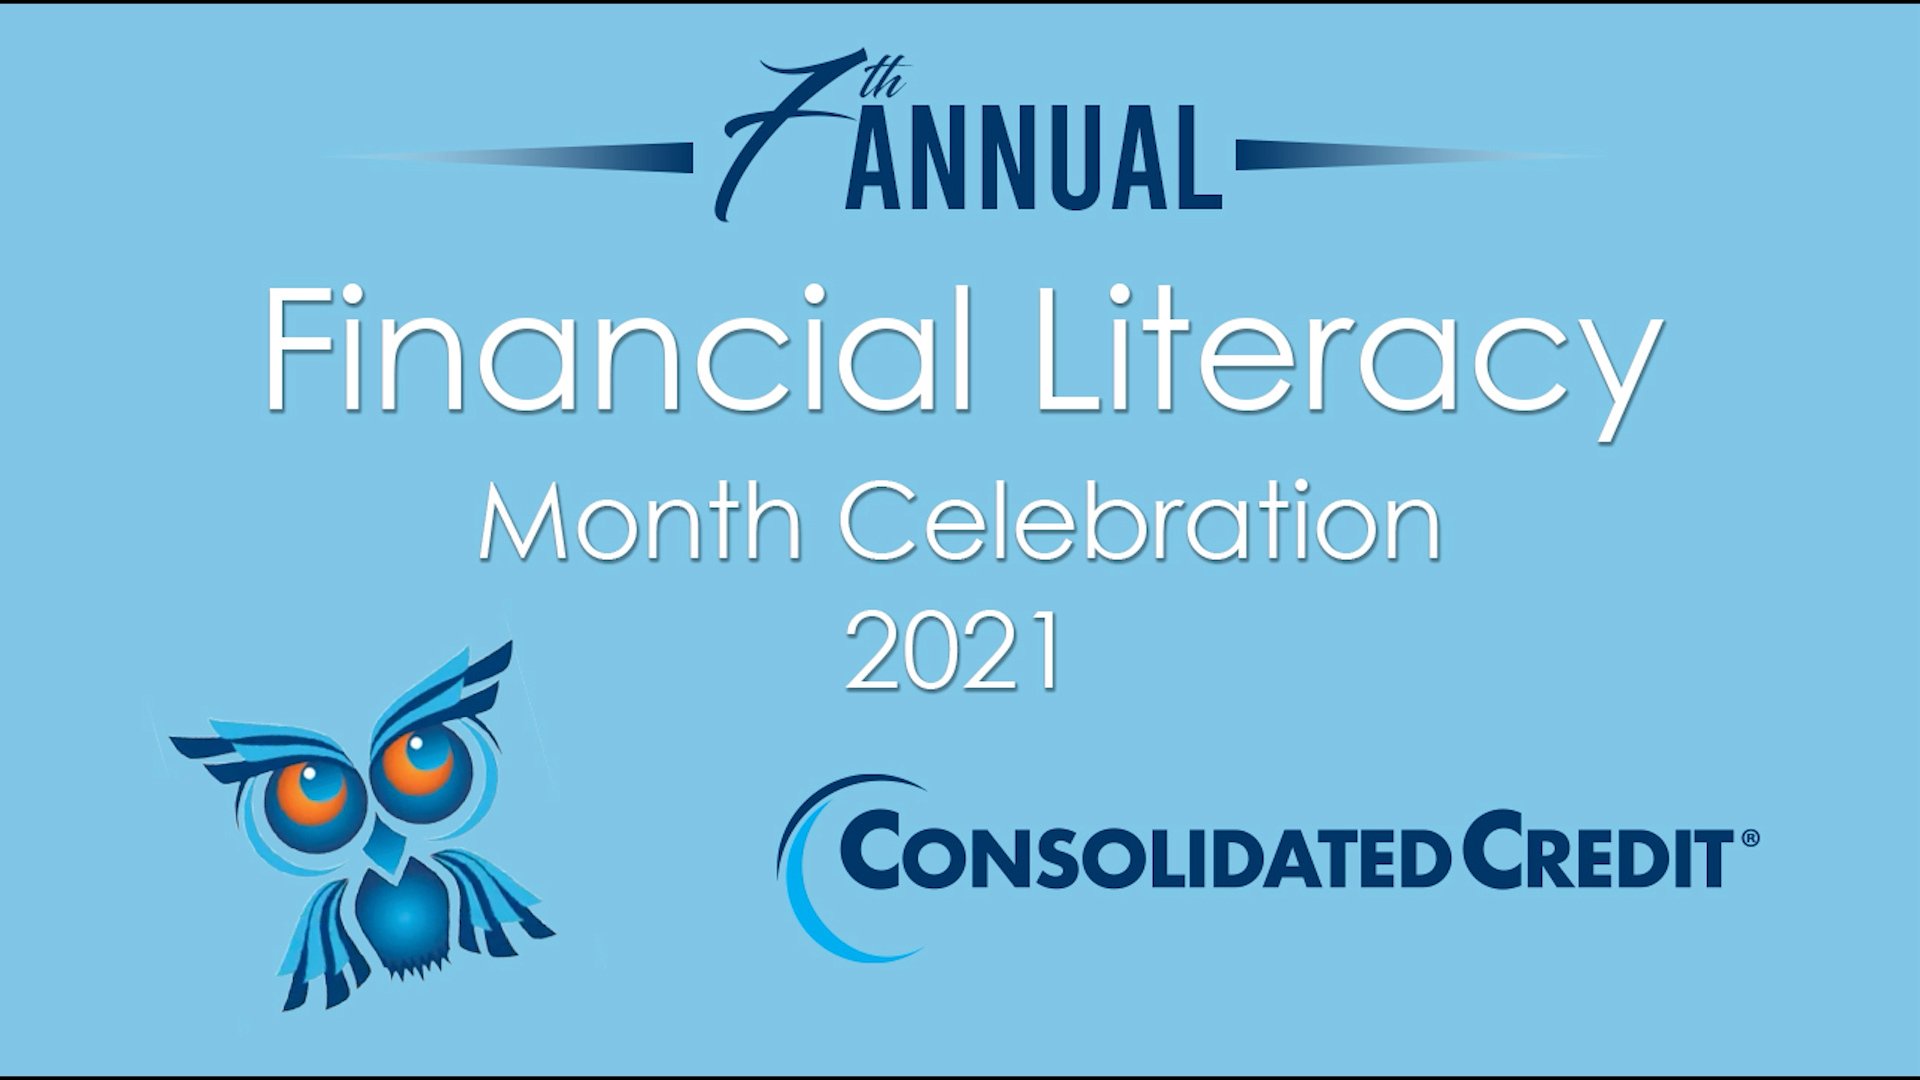 Image showing this topic: Consolidated Credit Celebrates 28 Years of Financial Literacy